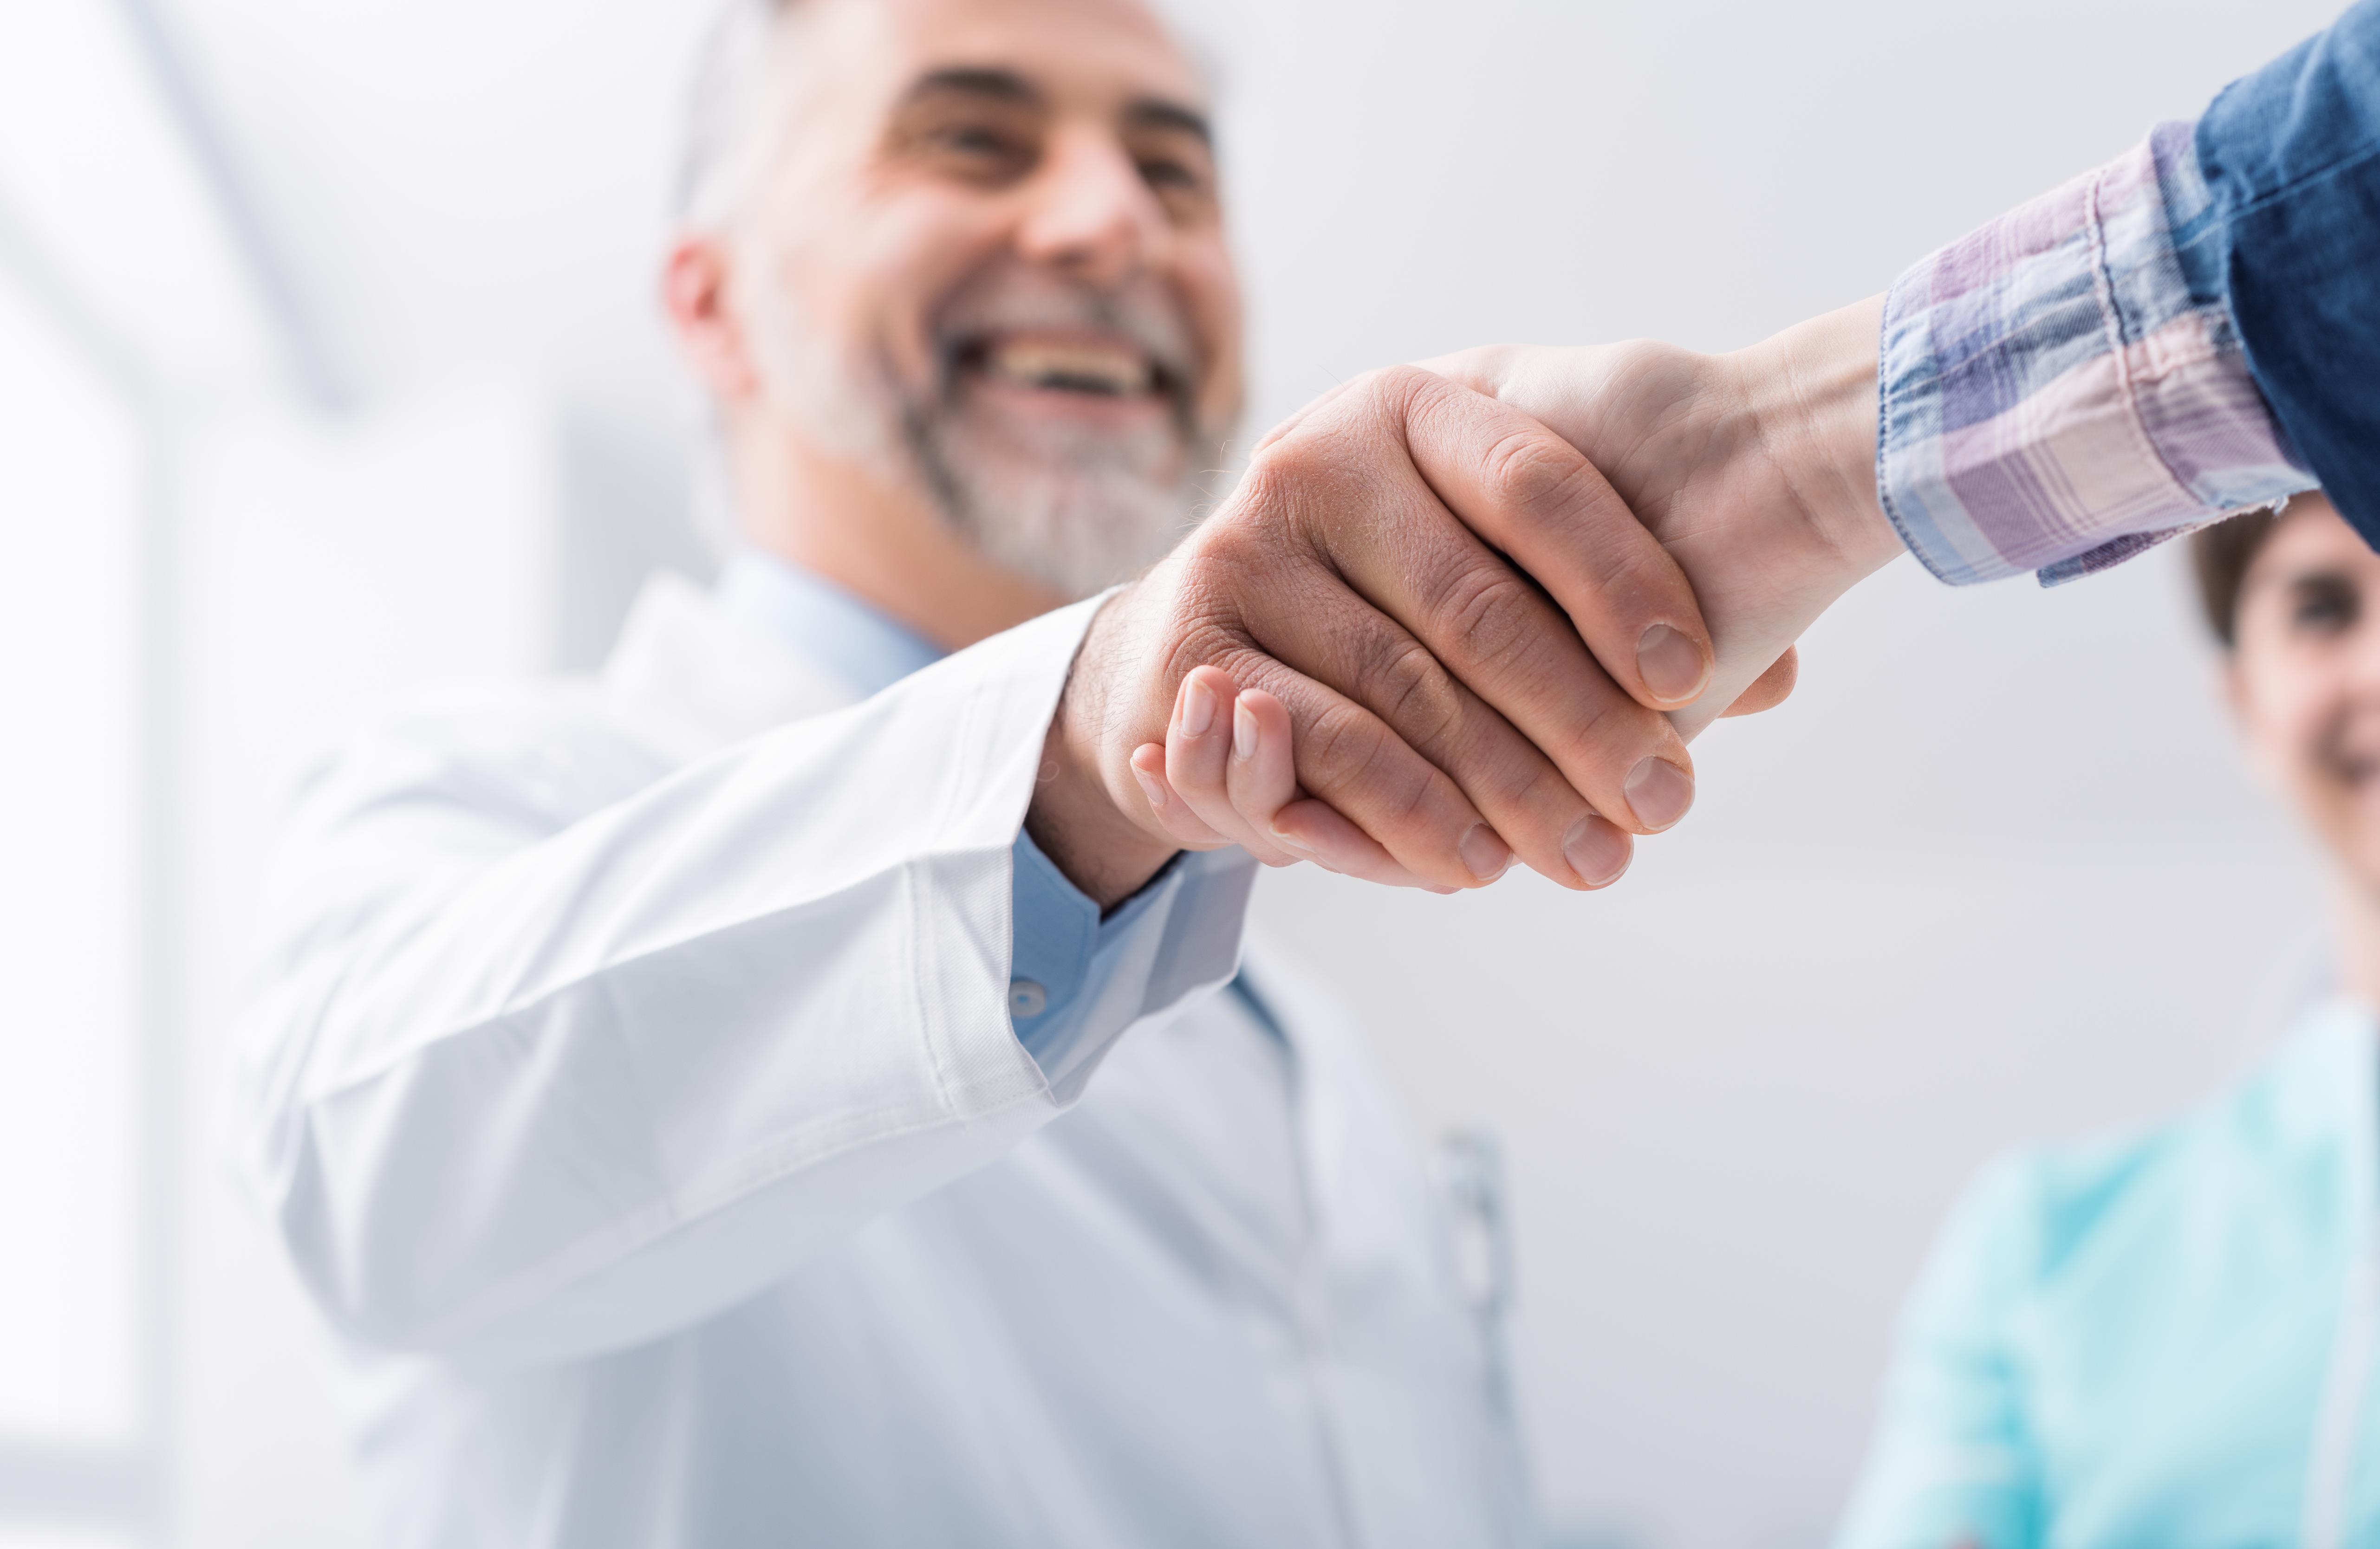 Medical professional shaking hands with patient. 